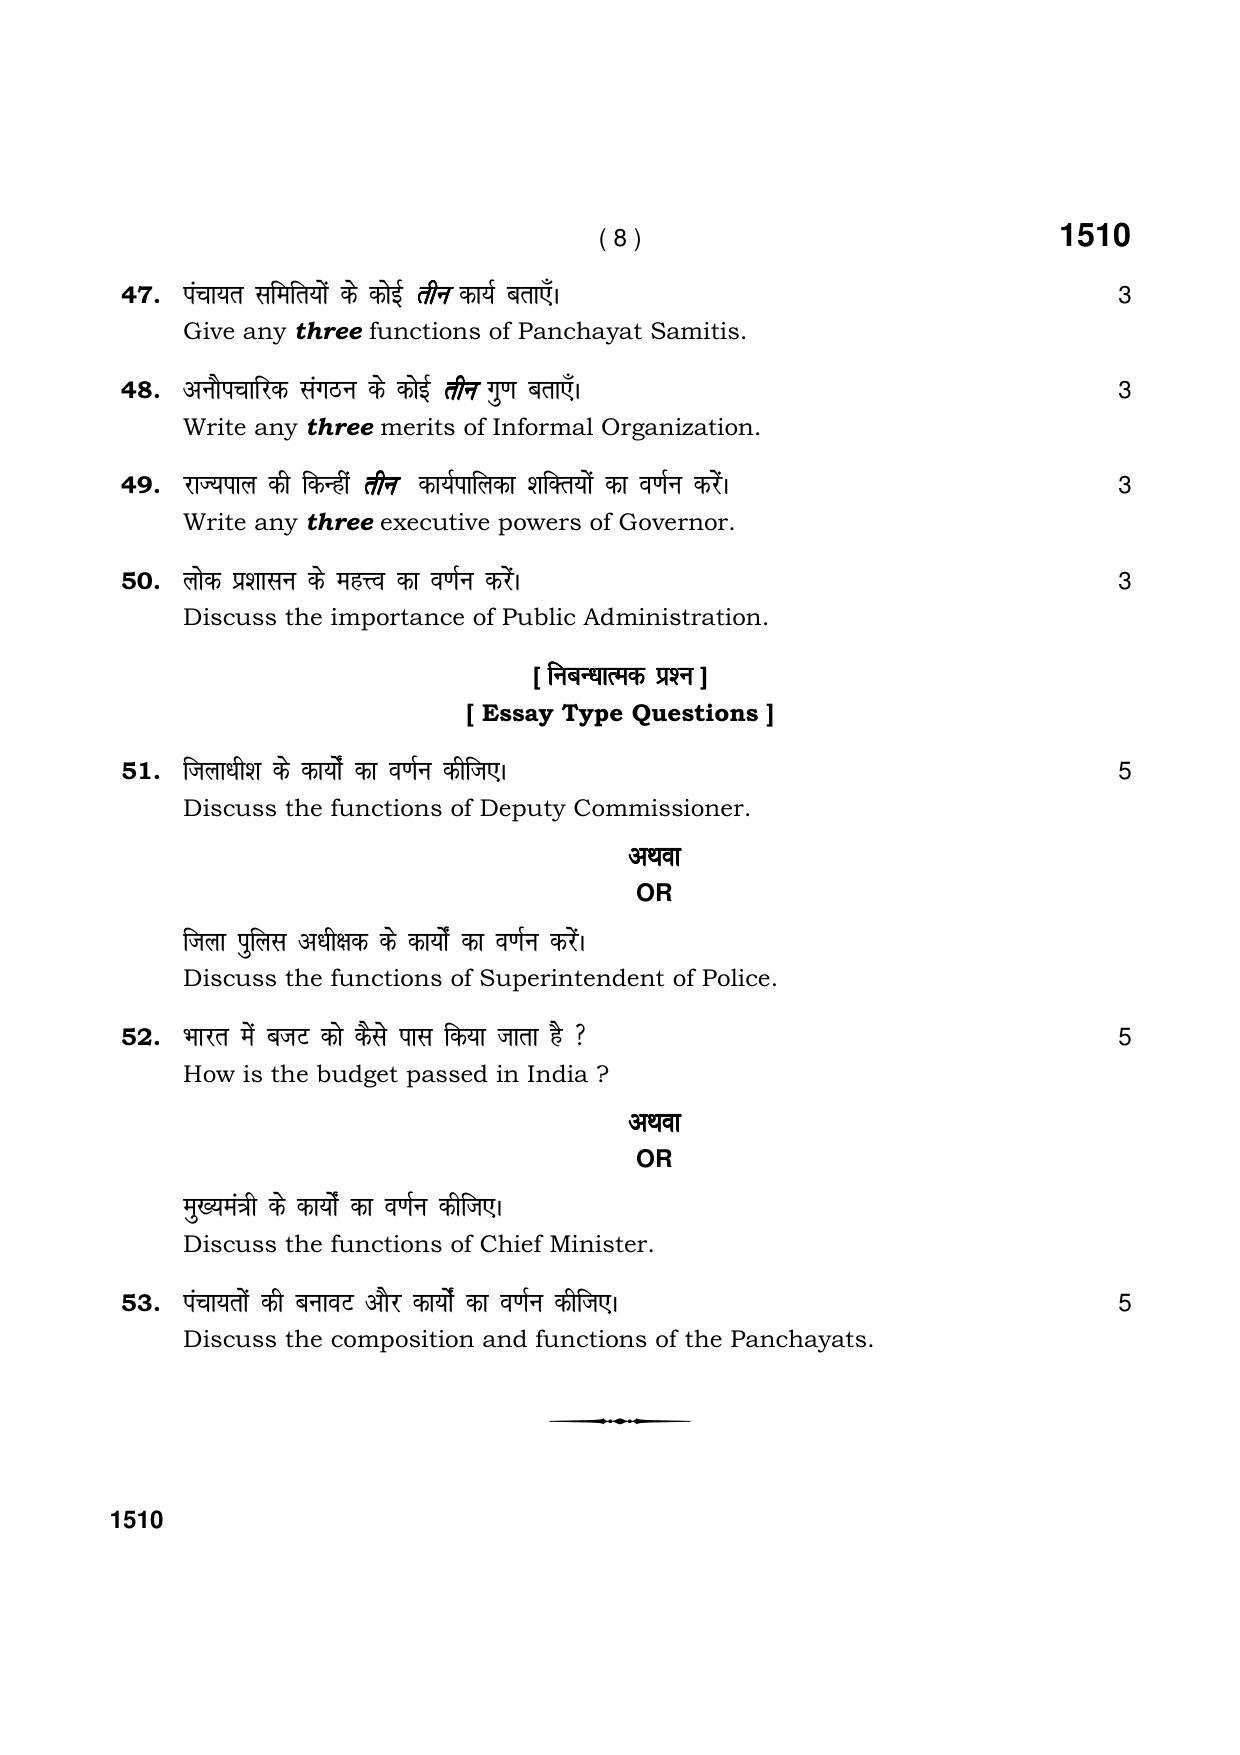 Haryana Board HBSE Class 11 Pub. Administration 2021 Question Paper - Page 8